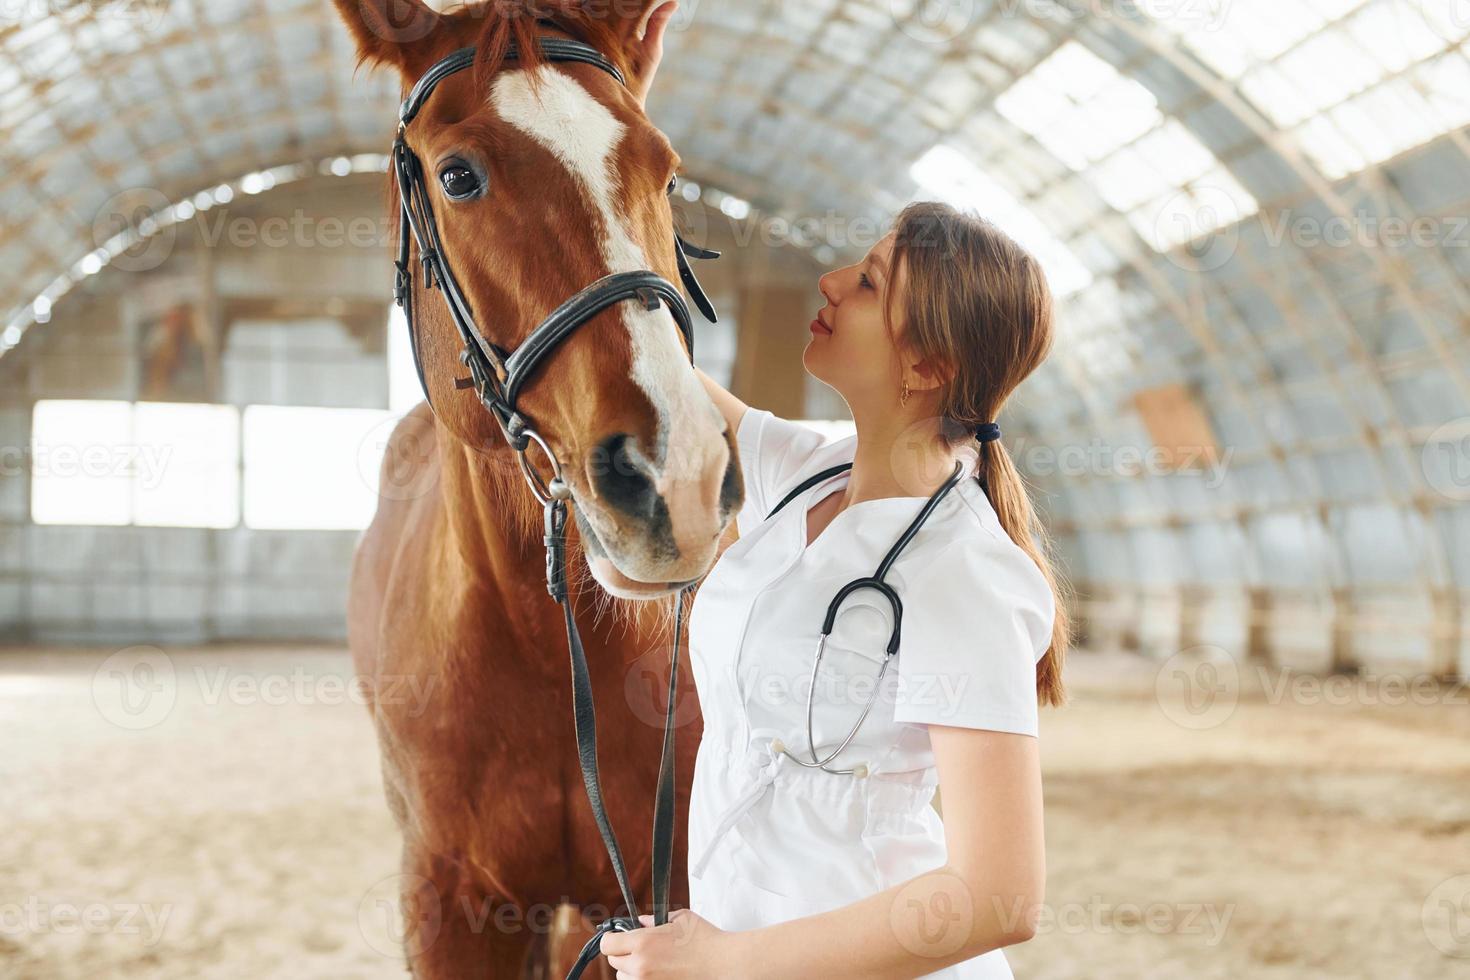 Checking the health of an animal. Female doctor in white coat is with horse on a stable photo